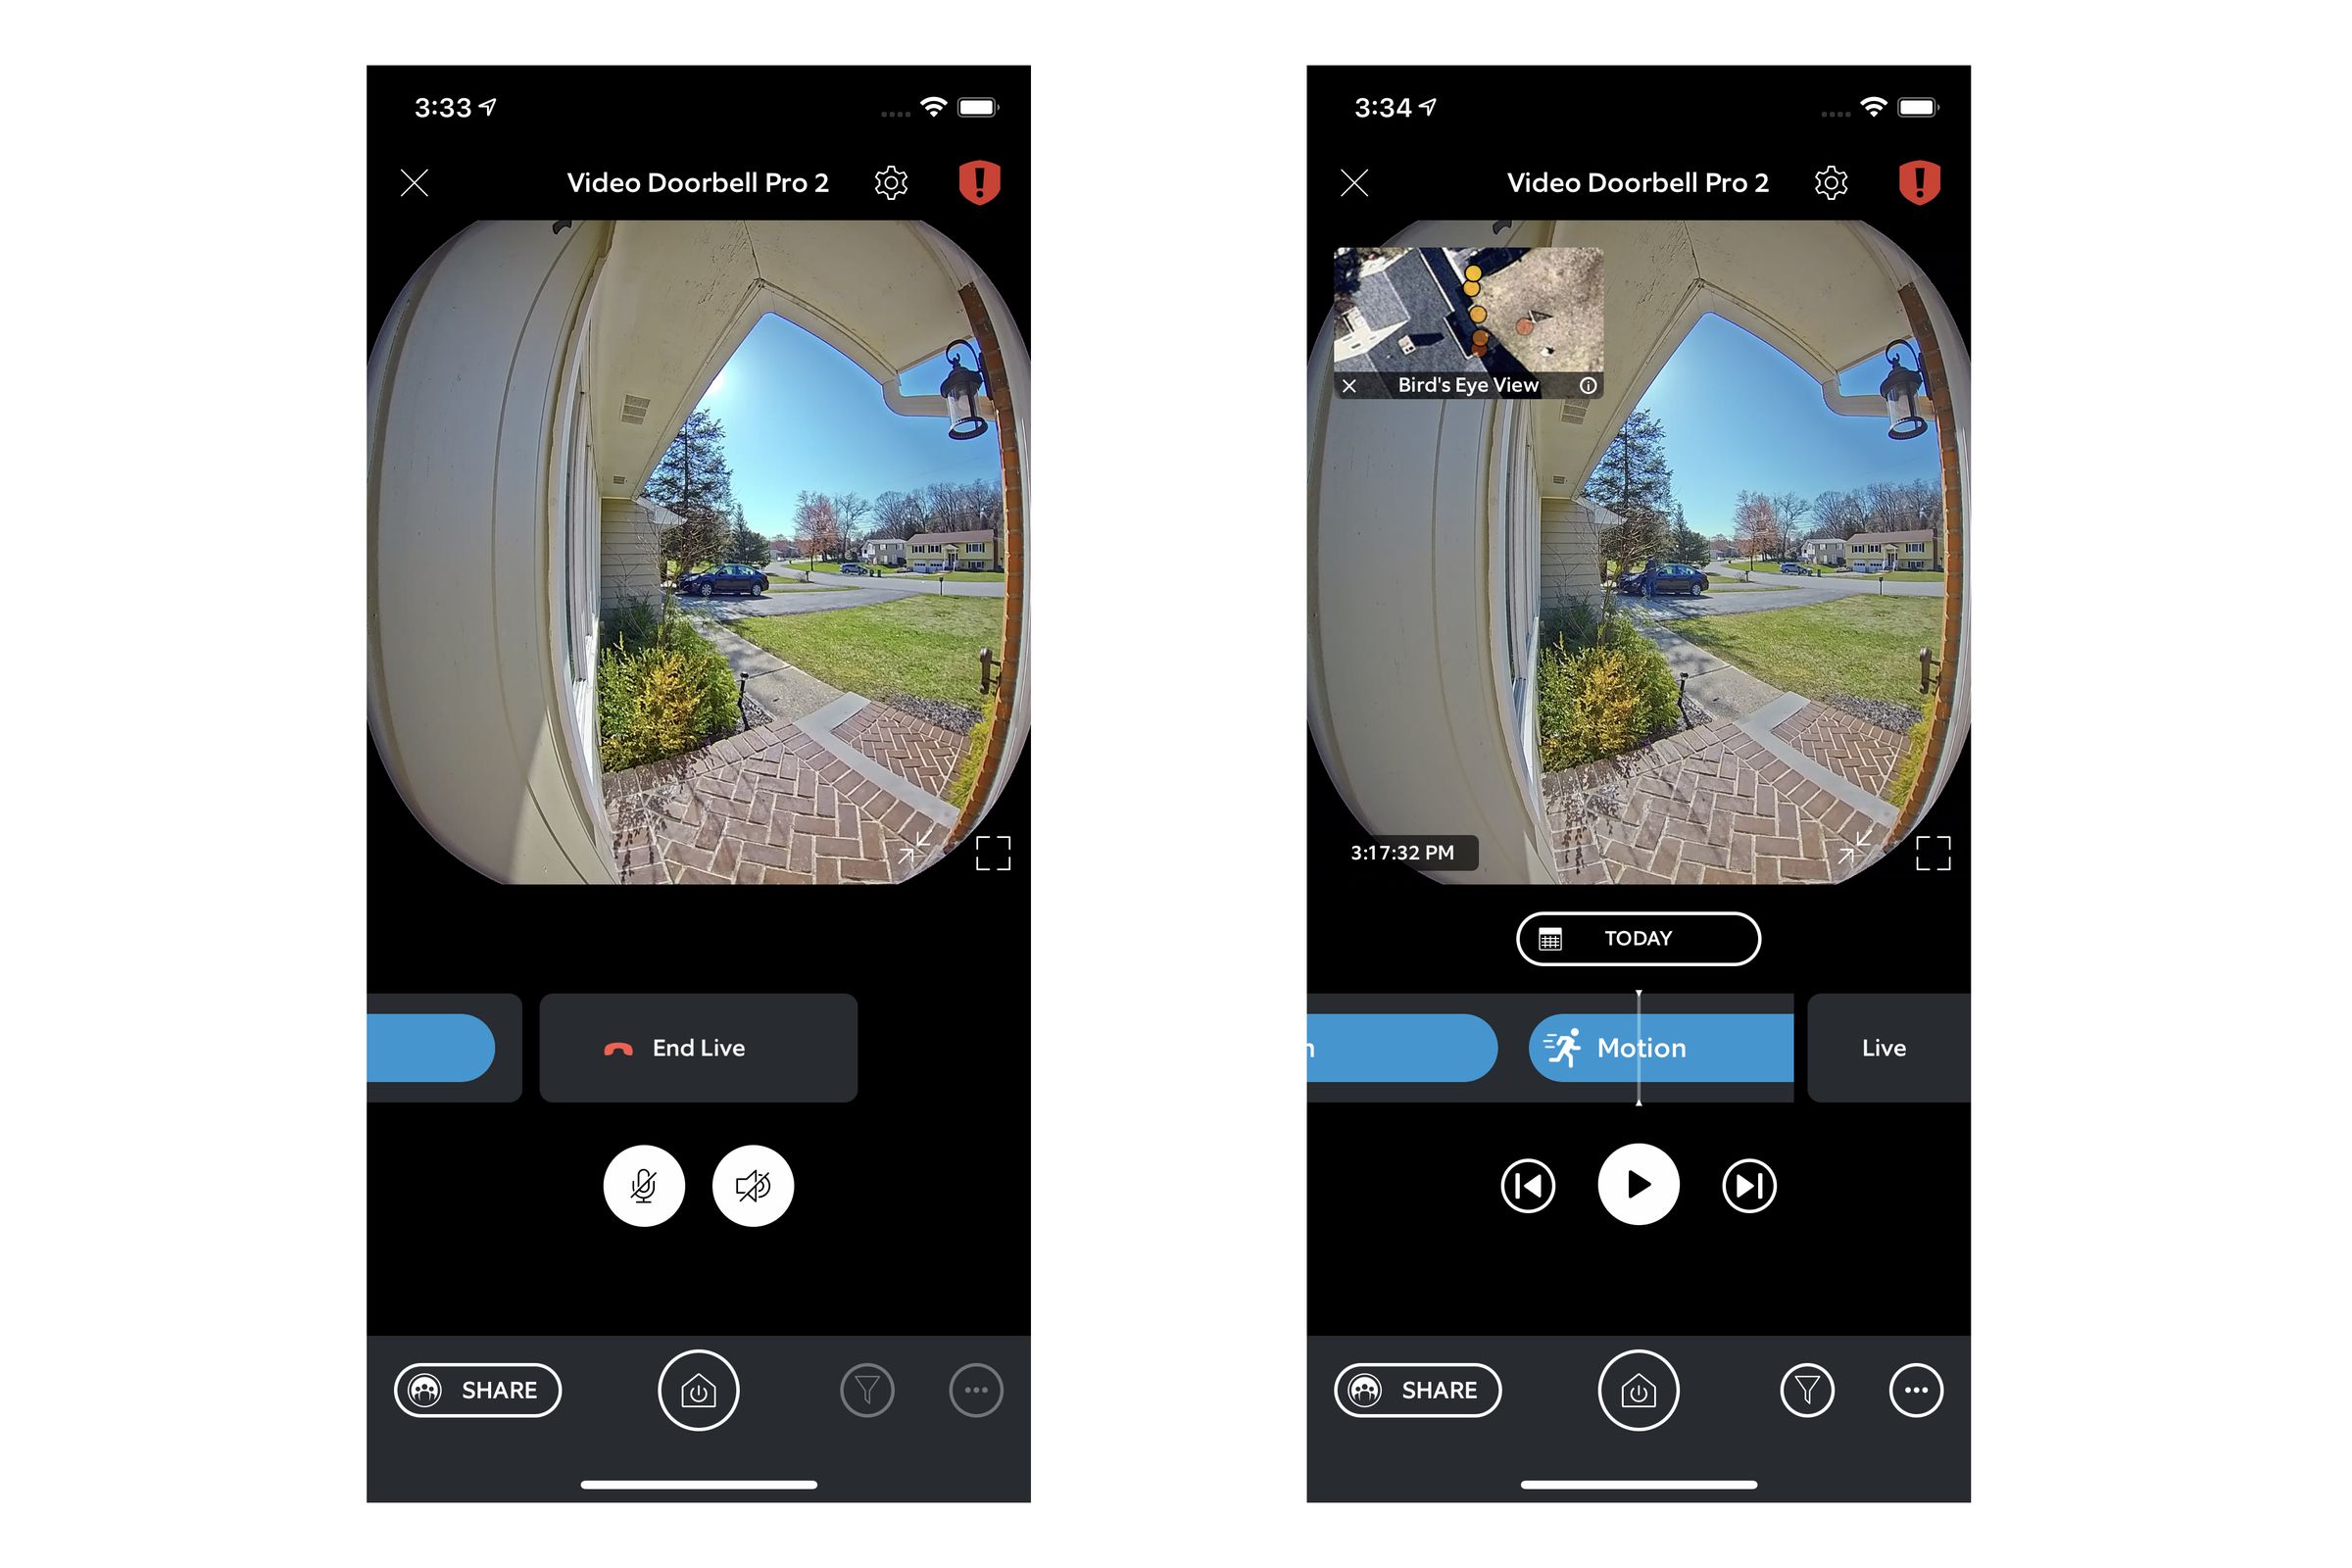 The Video Doorbell Pro 2 shows more of my front porch than other doorbells. The new 3D Motion Detection feature provides the bird’s-eye view of movement on my property, seen in the right image.